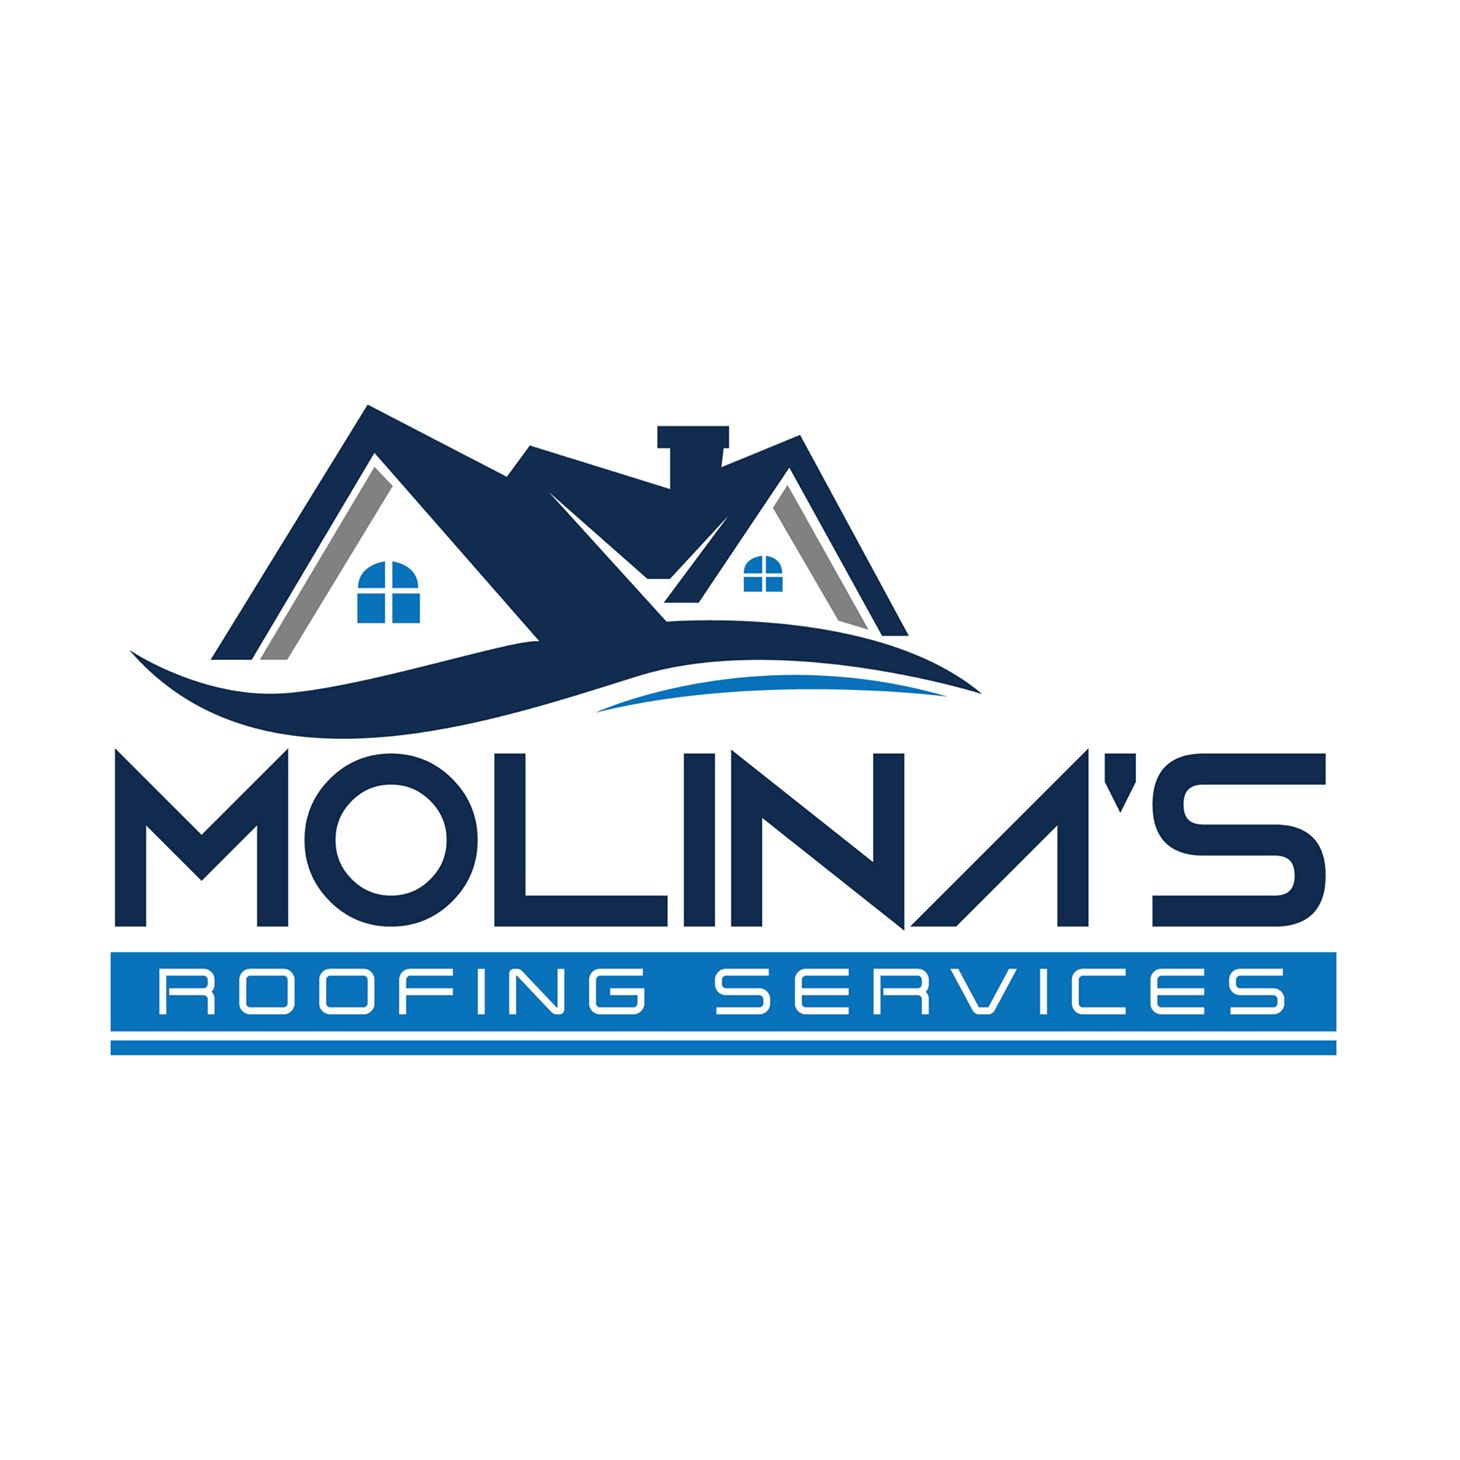 Company logo of Molina's Roofing Services